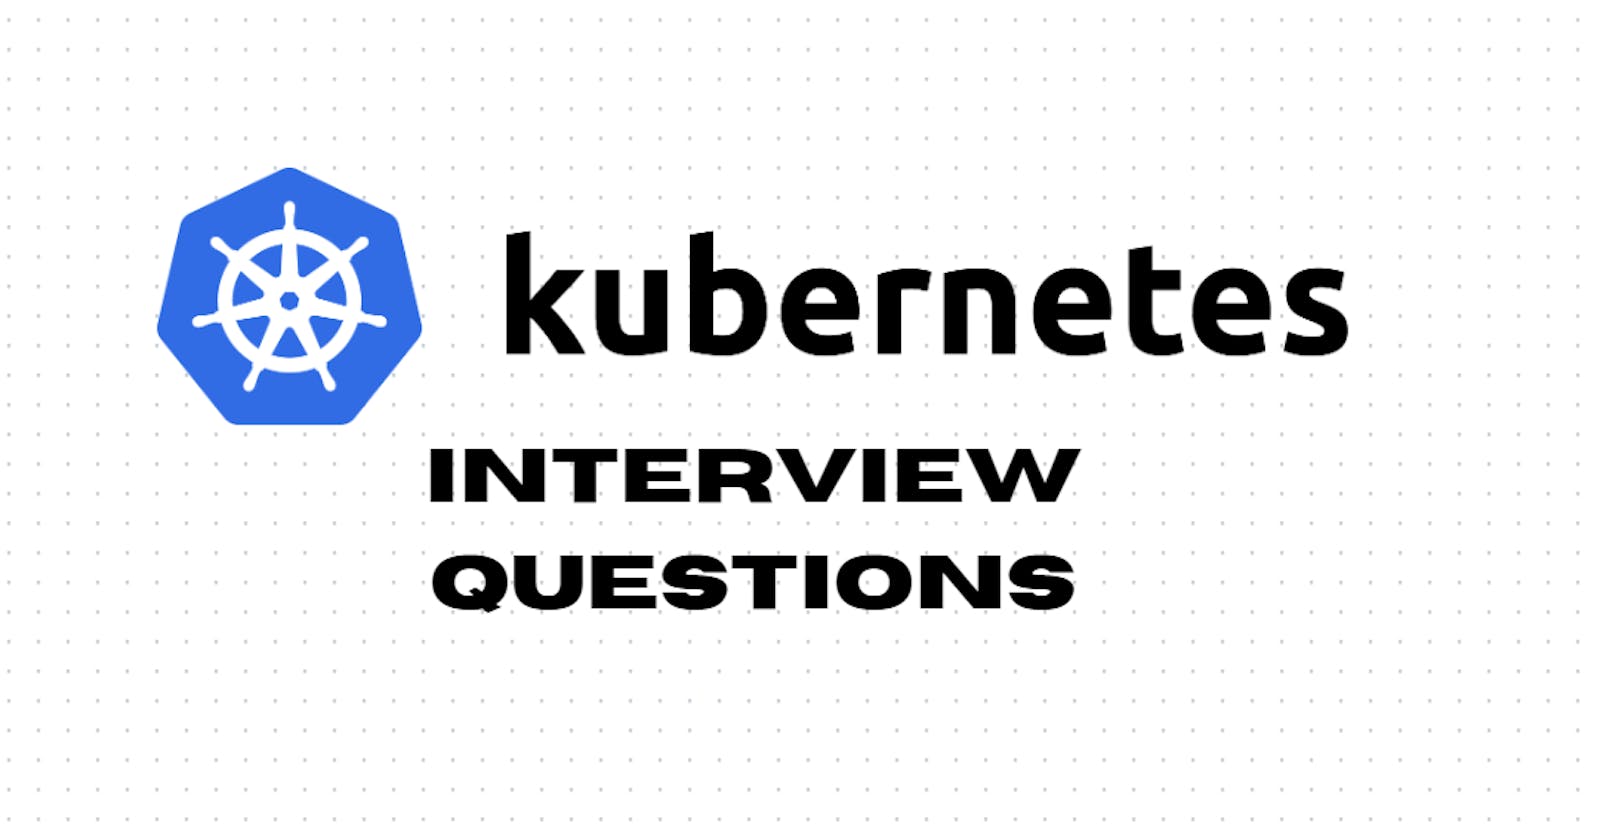 Day 37 Task: Kubernetes Important Interview Questions.